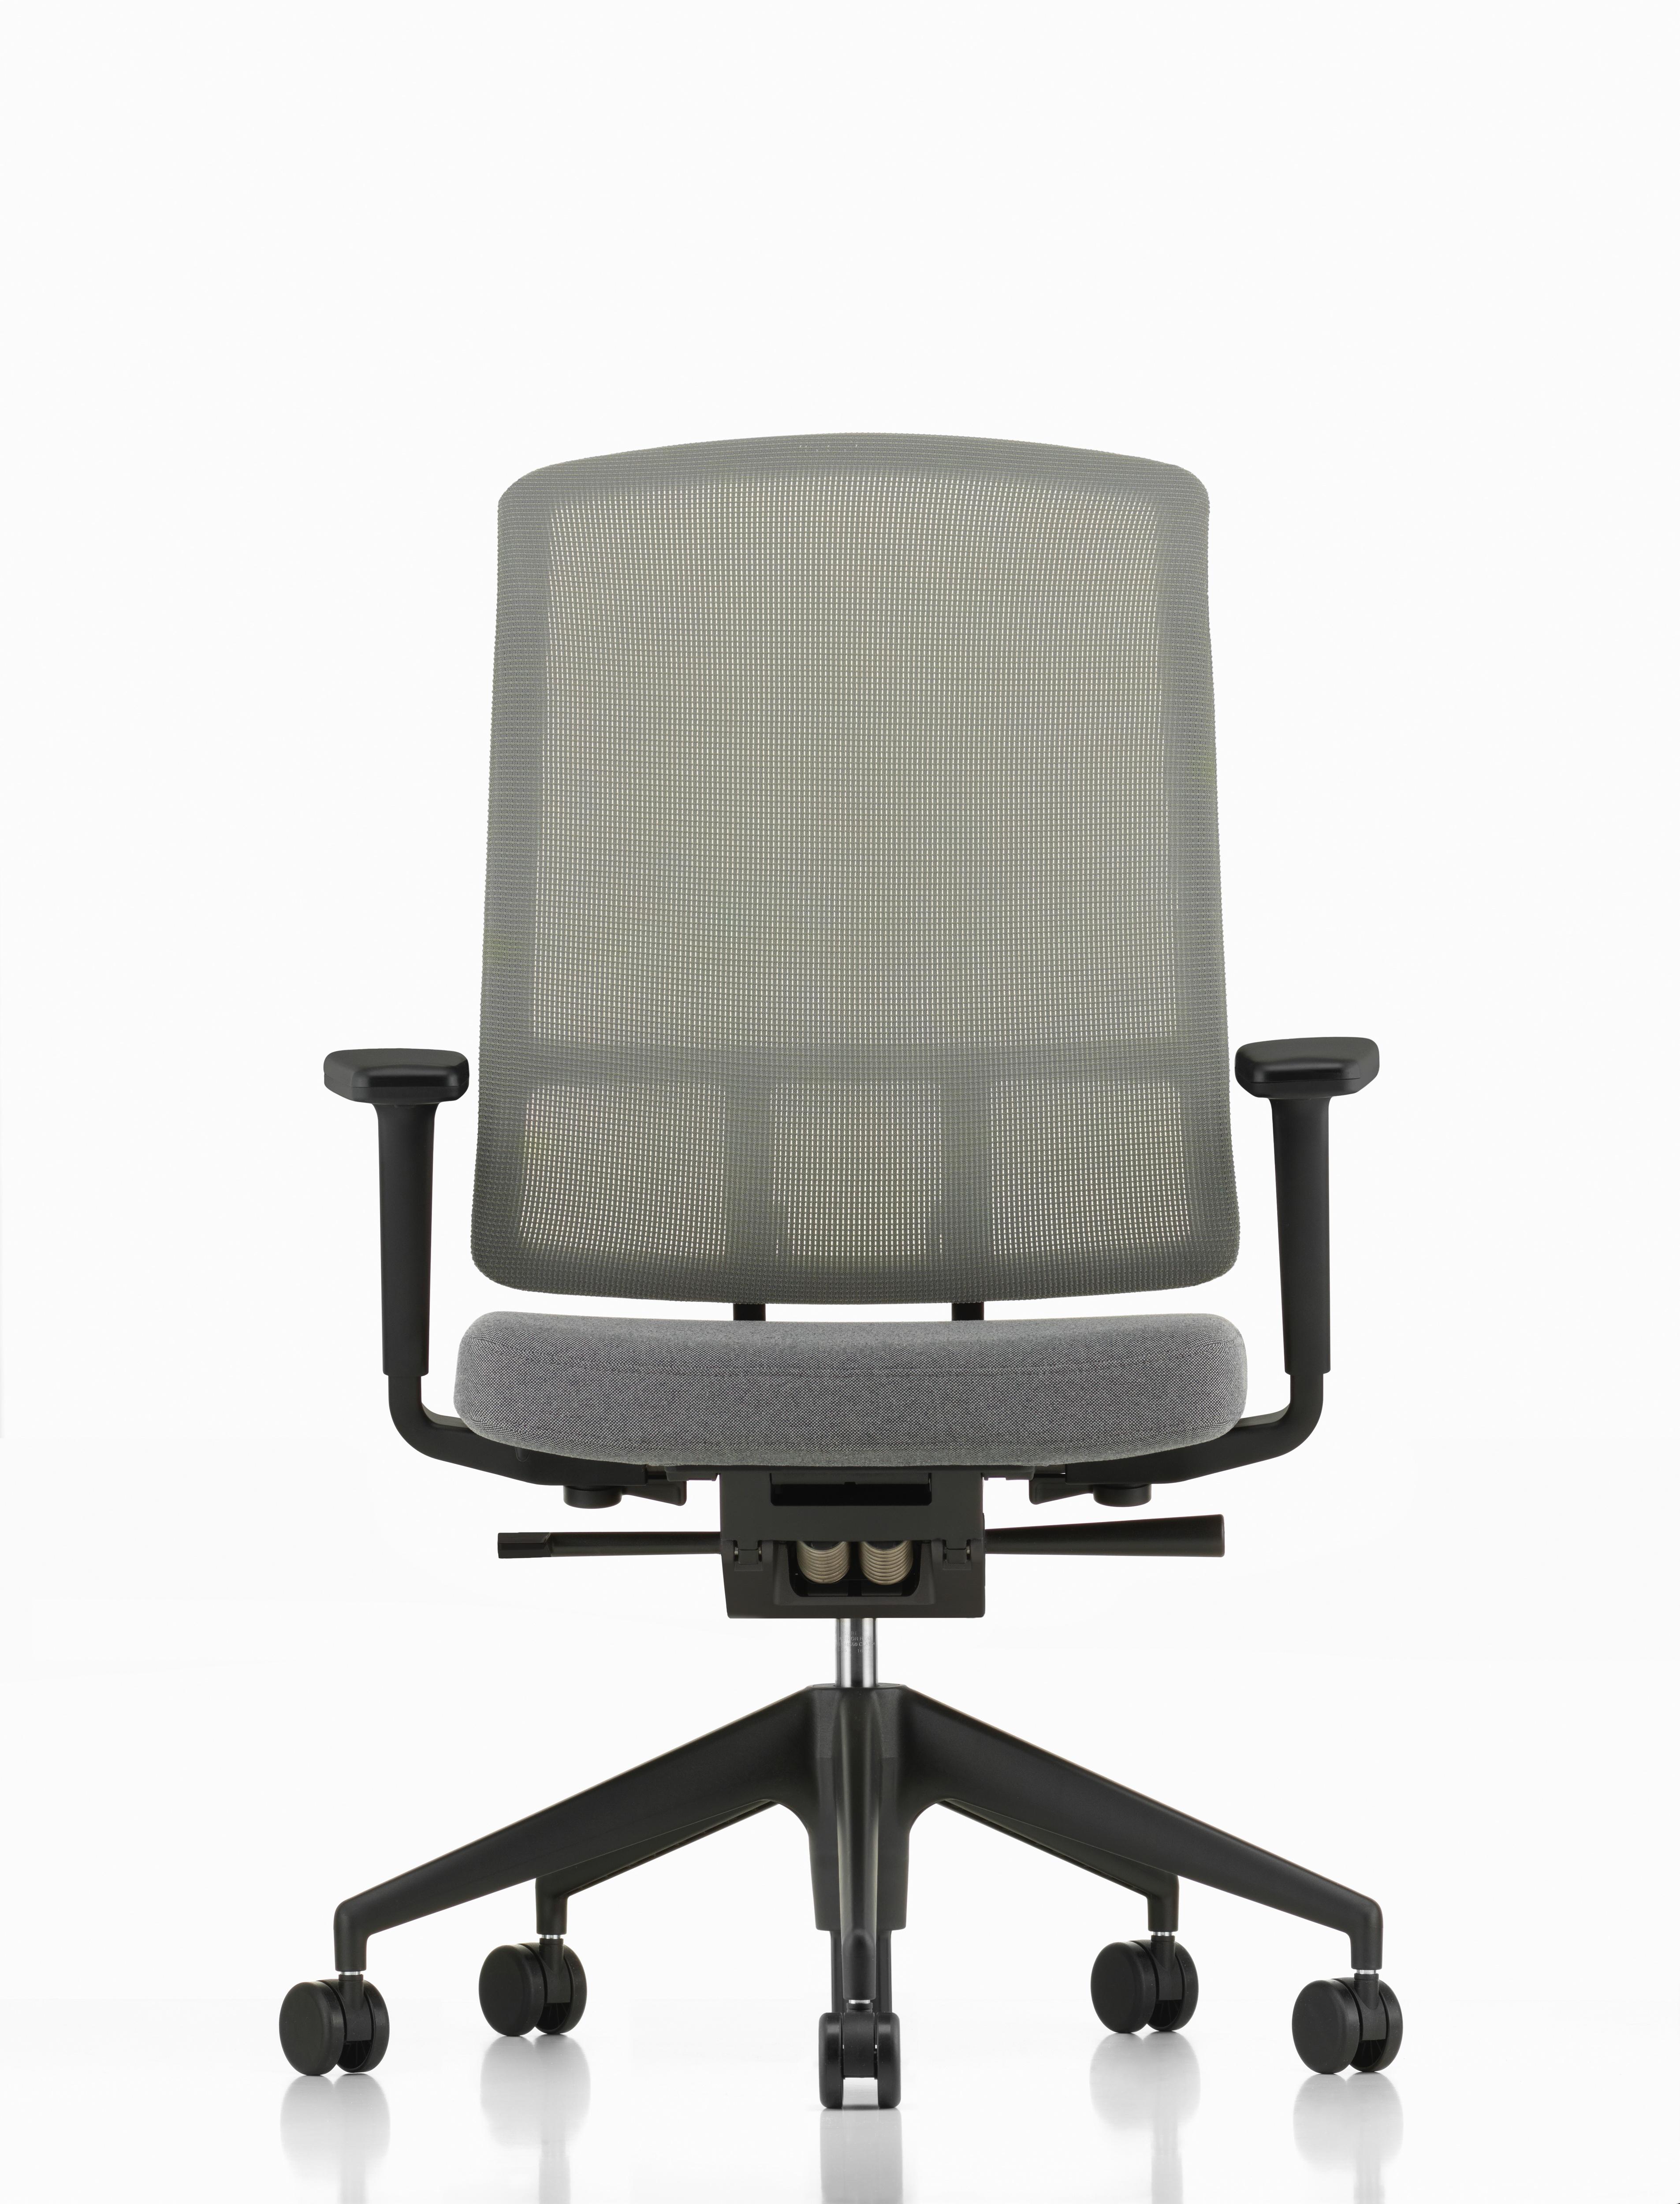 These items are currently only available in the United States.

The AM chair is the combined result of engineering skill, quality design and experience. It unites ergonomic functionality with technical elegance. Dynamic armrests and a